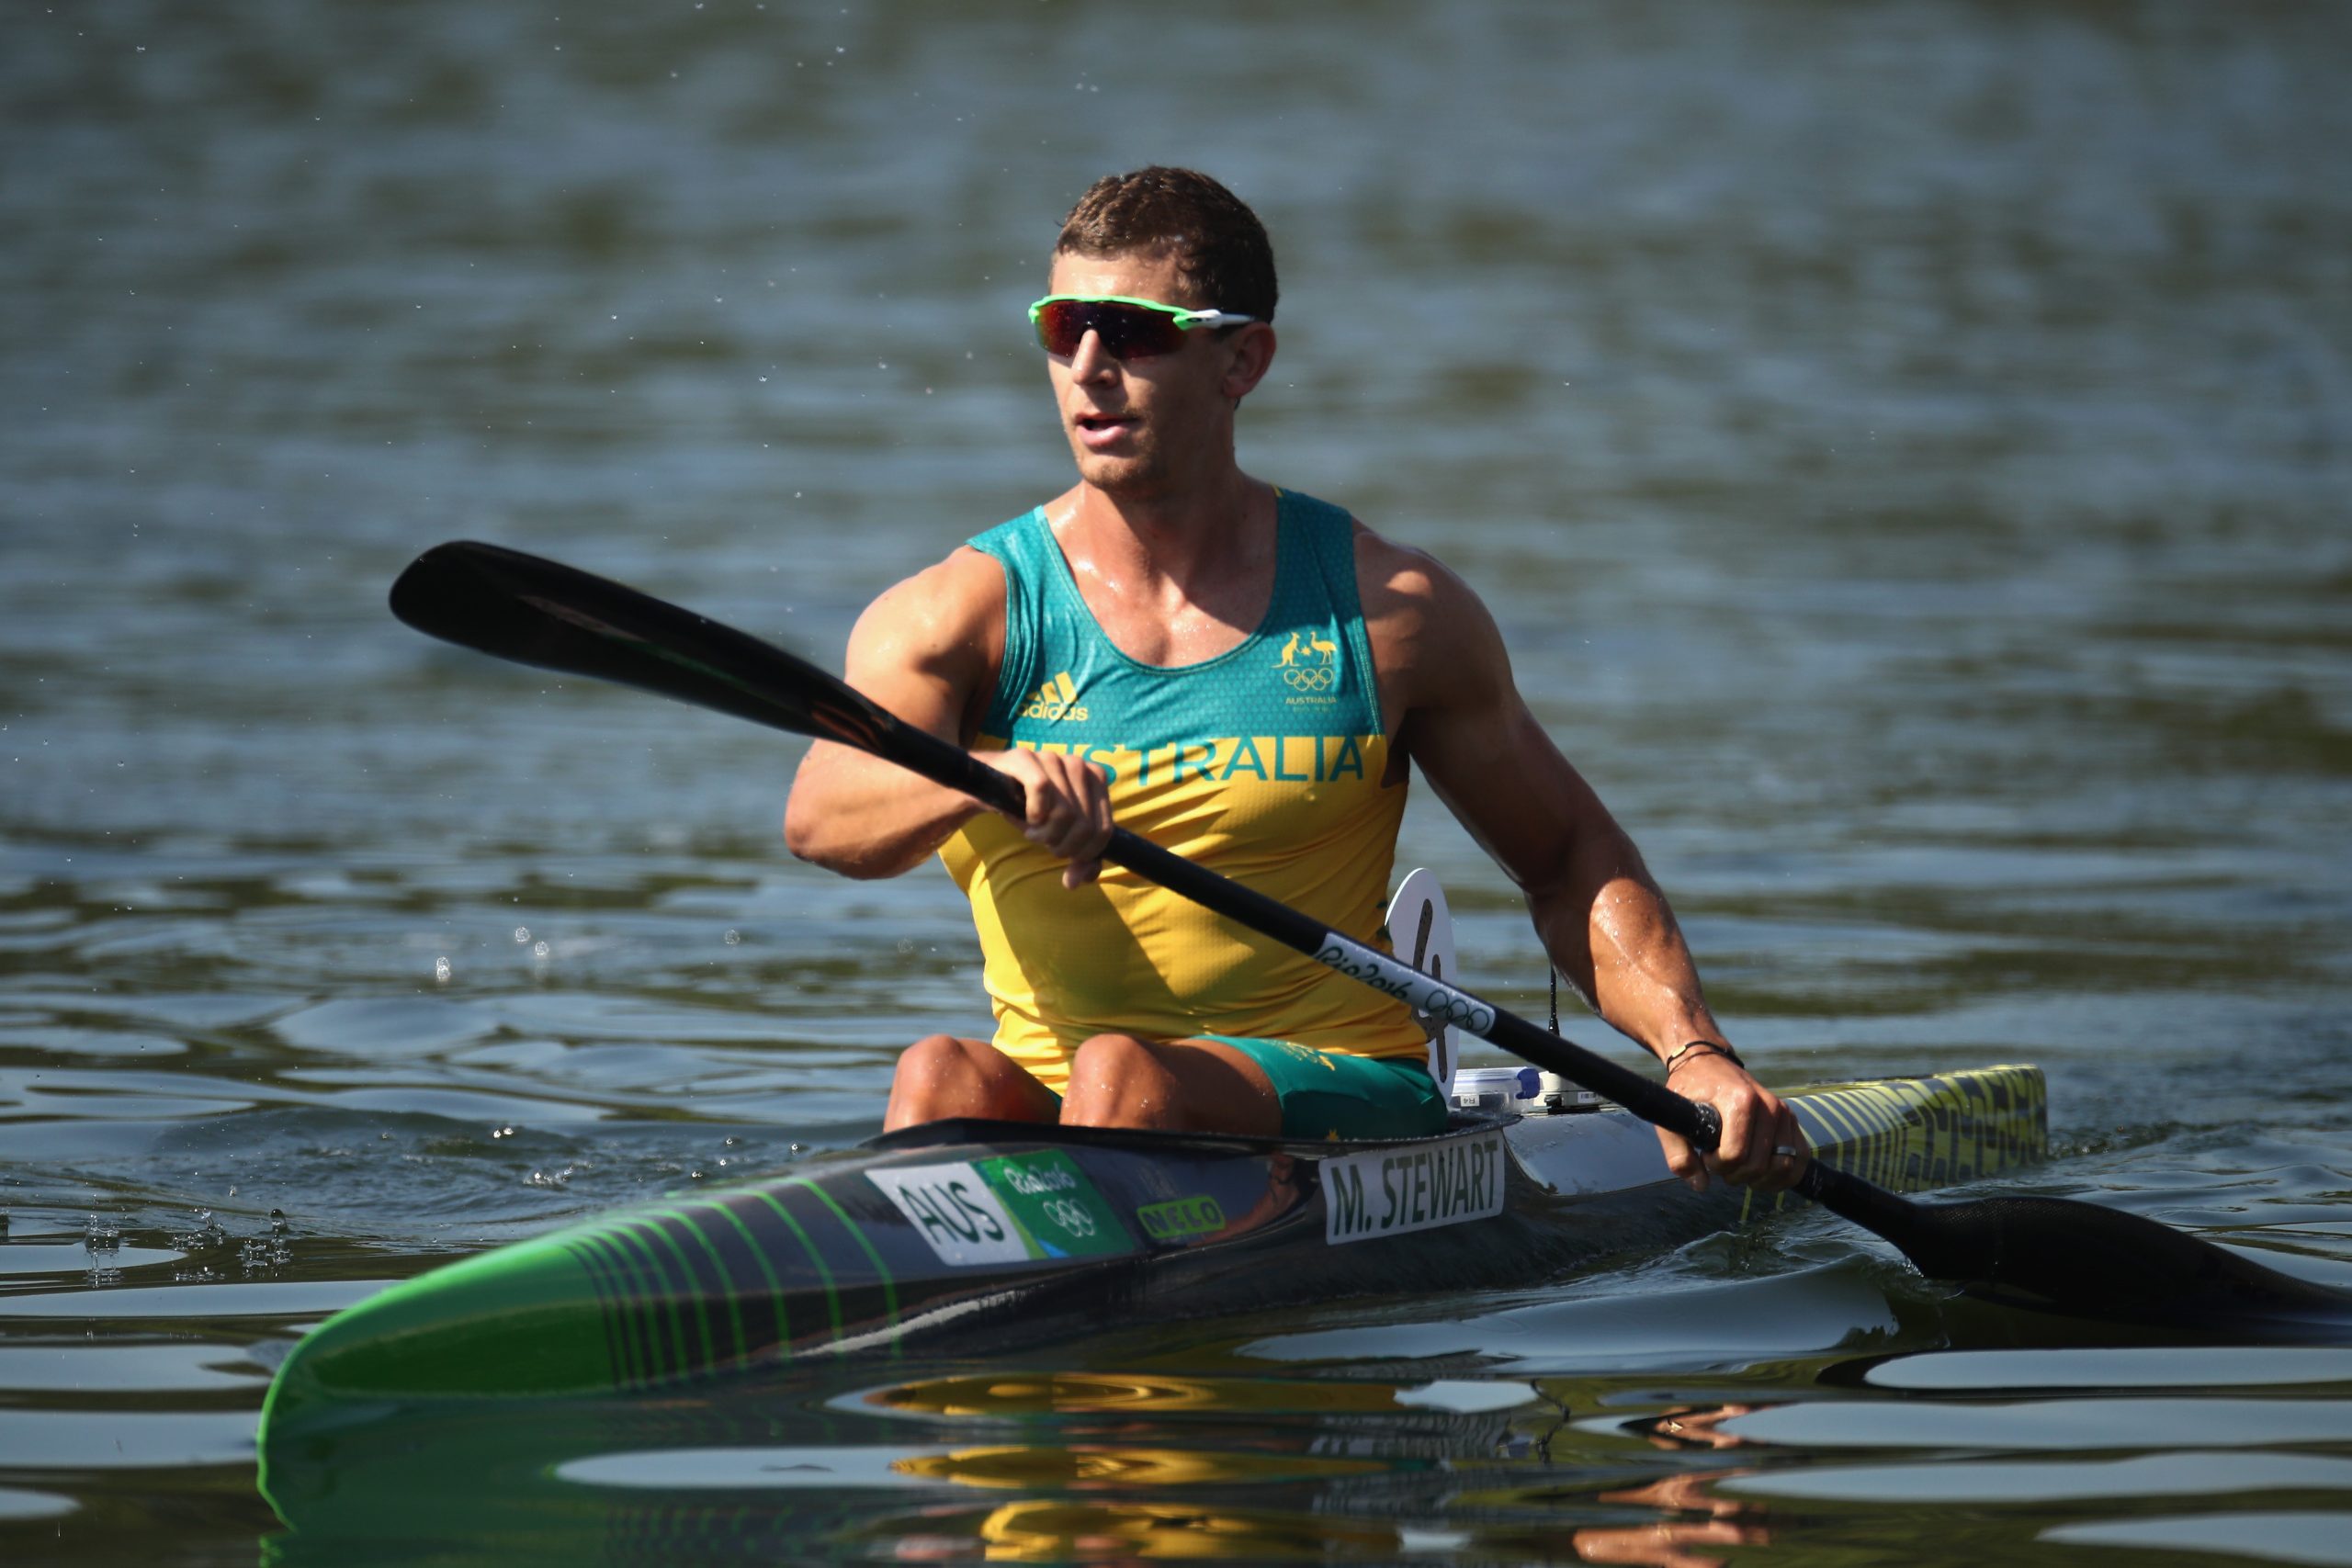 RIO DE JANEIRO, BRAZIL - AUGUST 15: Murray Stewart of Australia reacts after competing in the Canoe Sprint Men